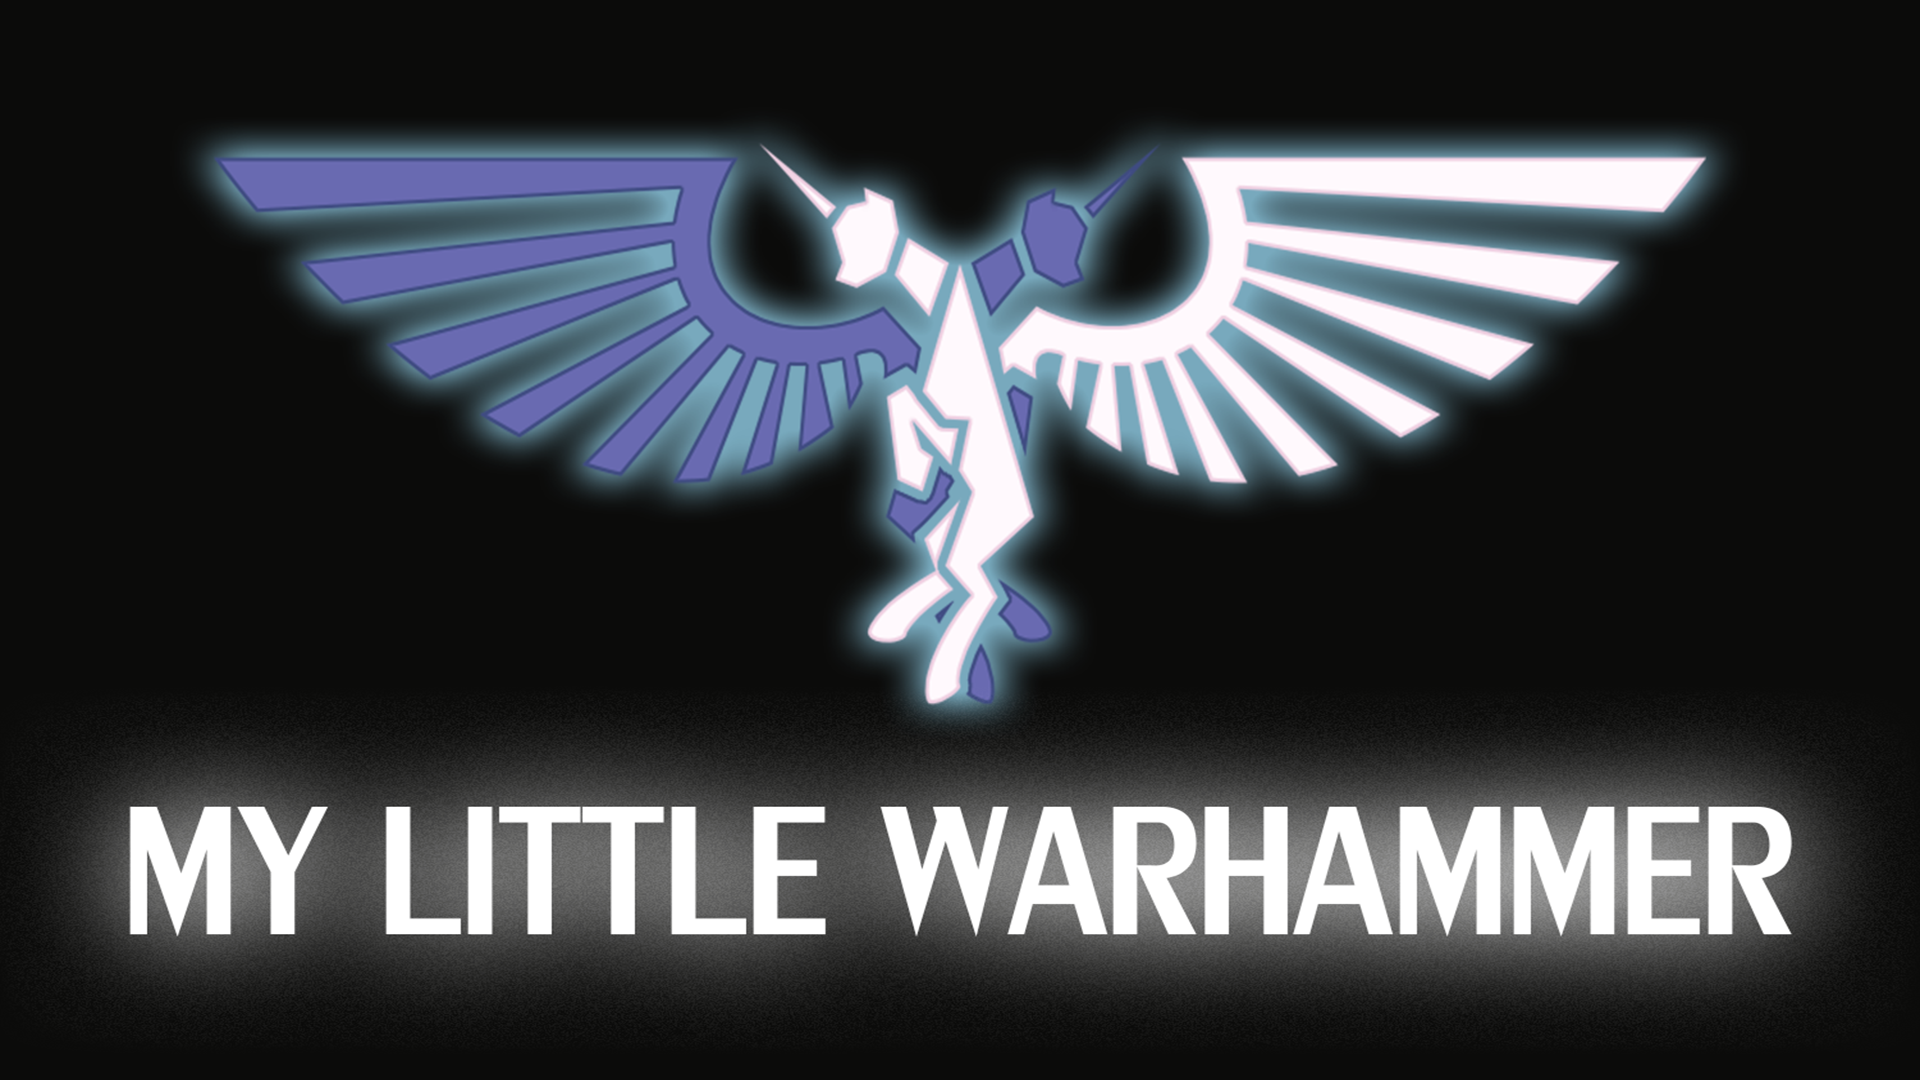 My Little Warhammer by Couth-Kancerous and Nathan2000